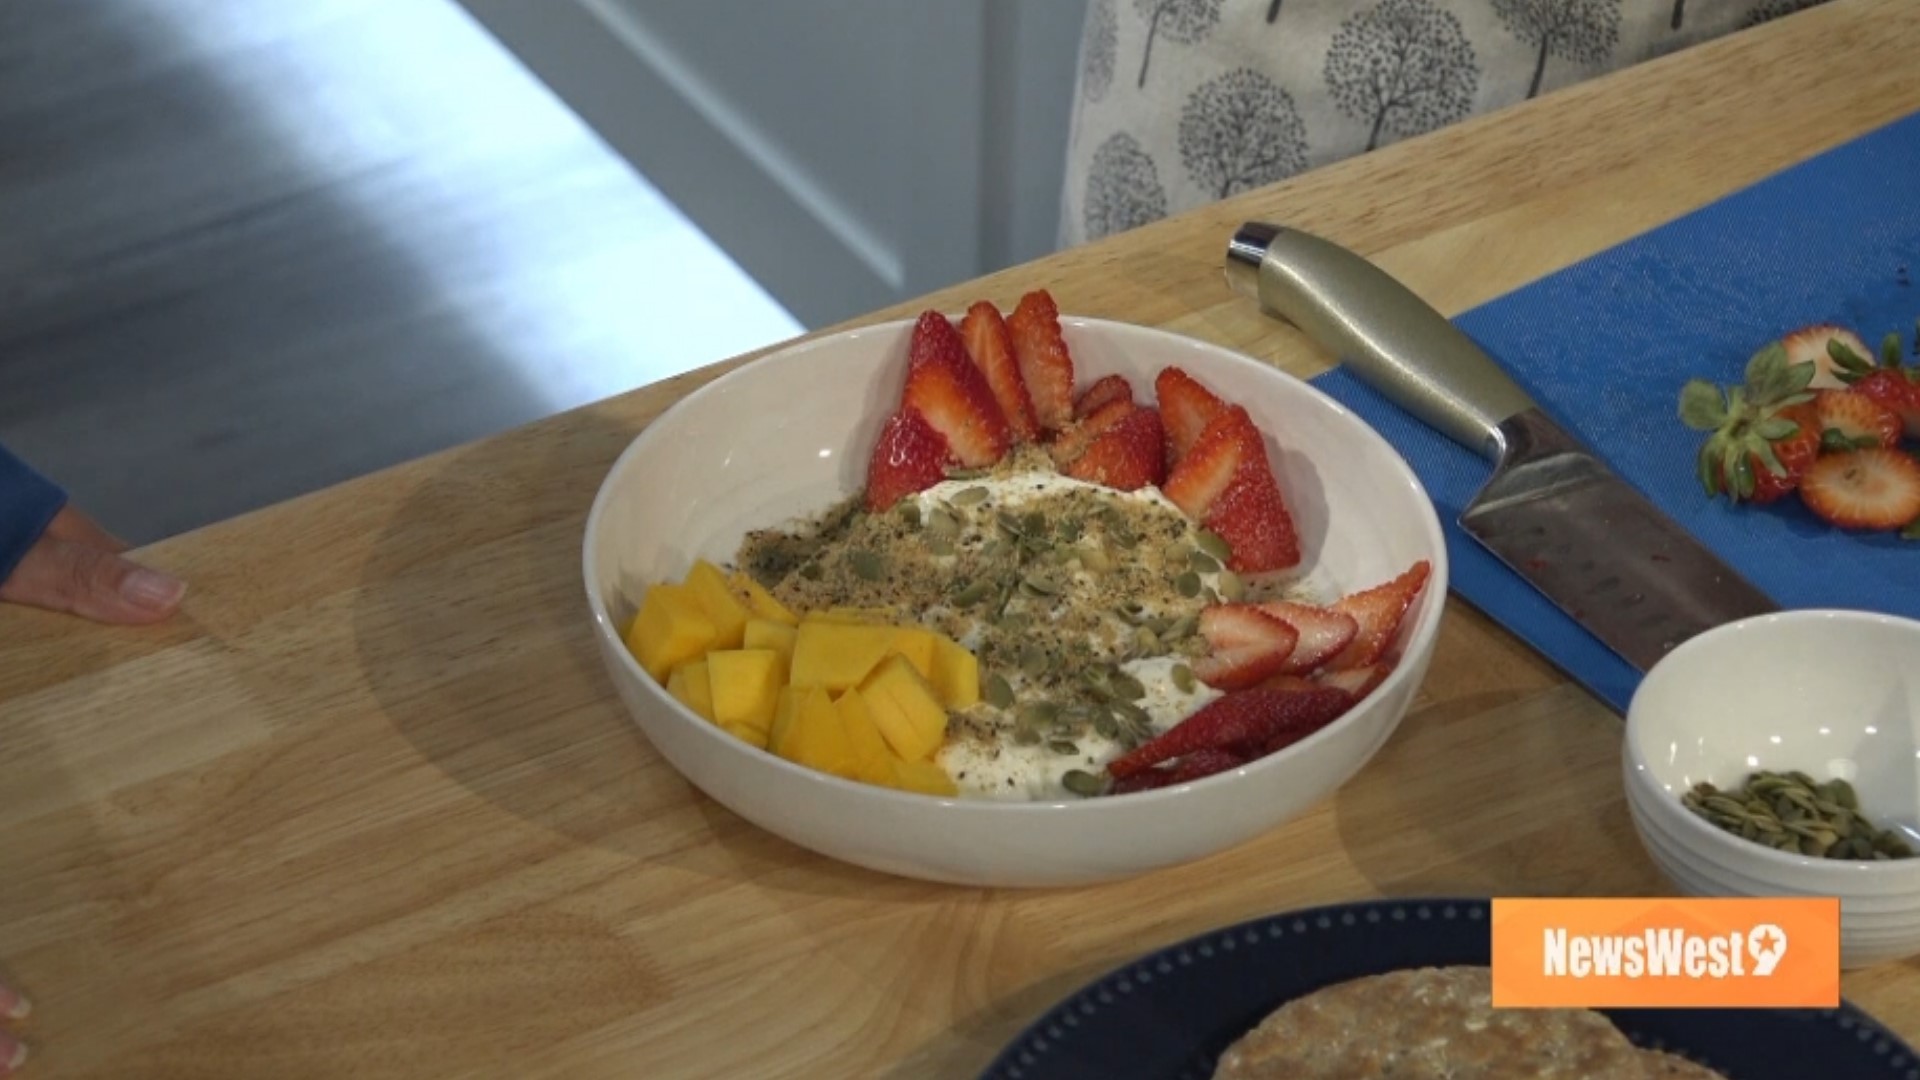 Learn how to make some easy breakfast meals with registered dietitian Carina Myatt.